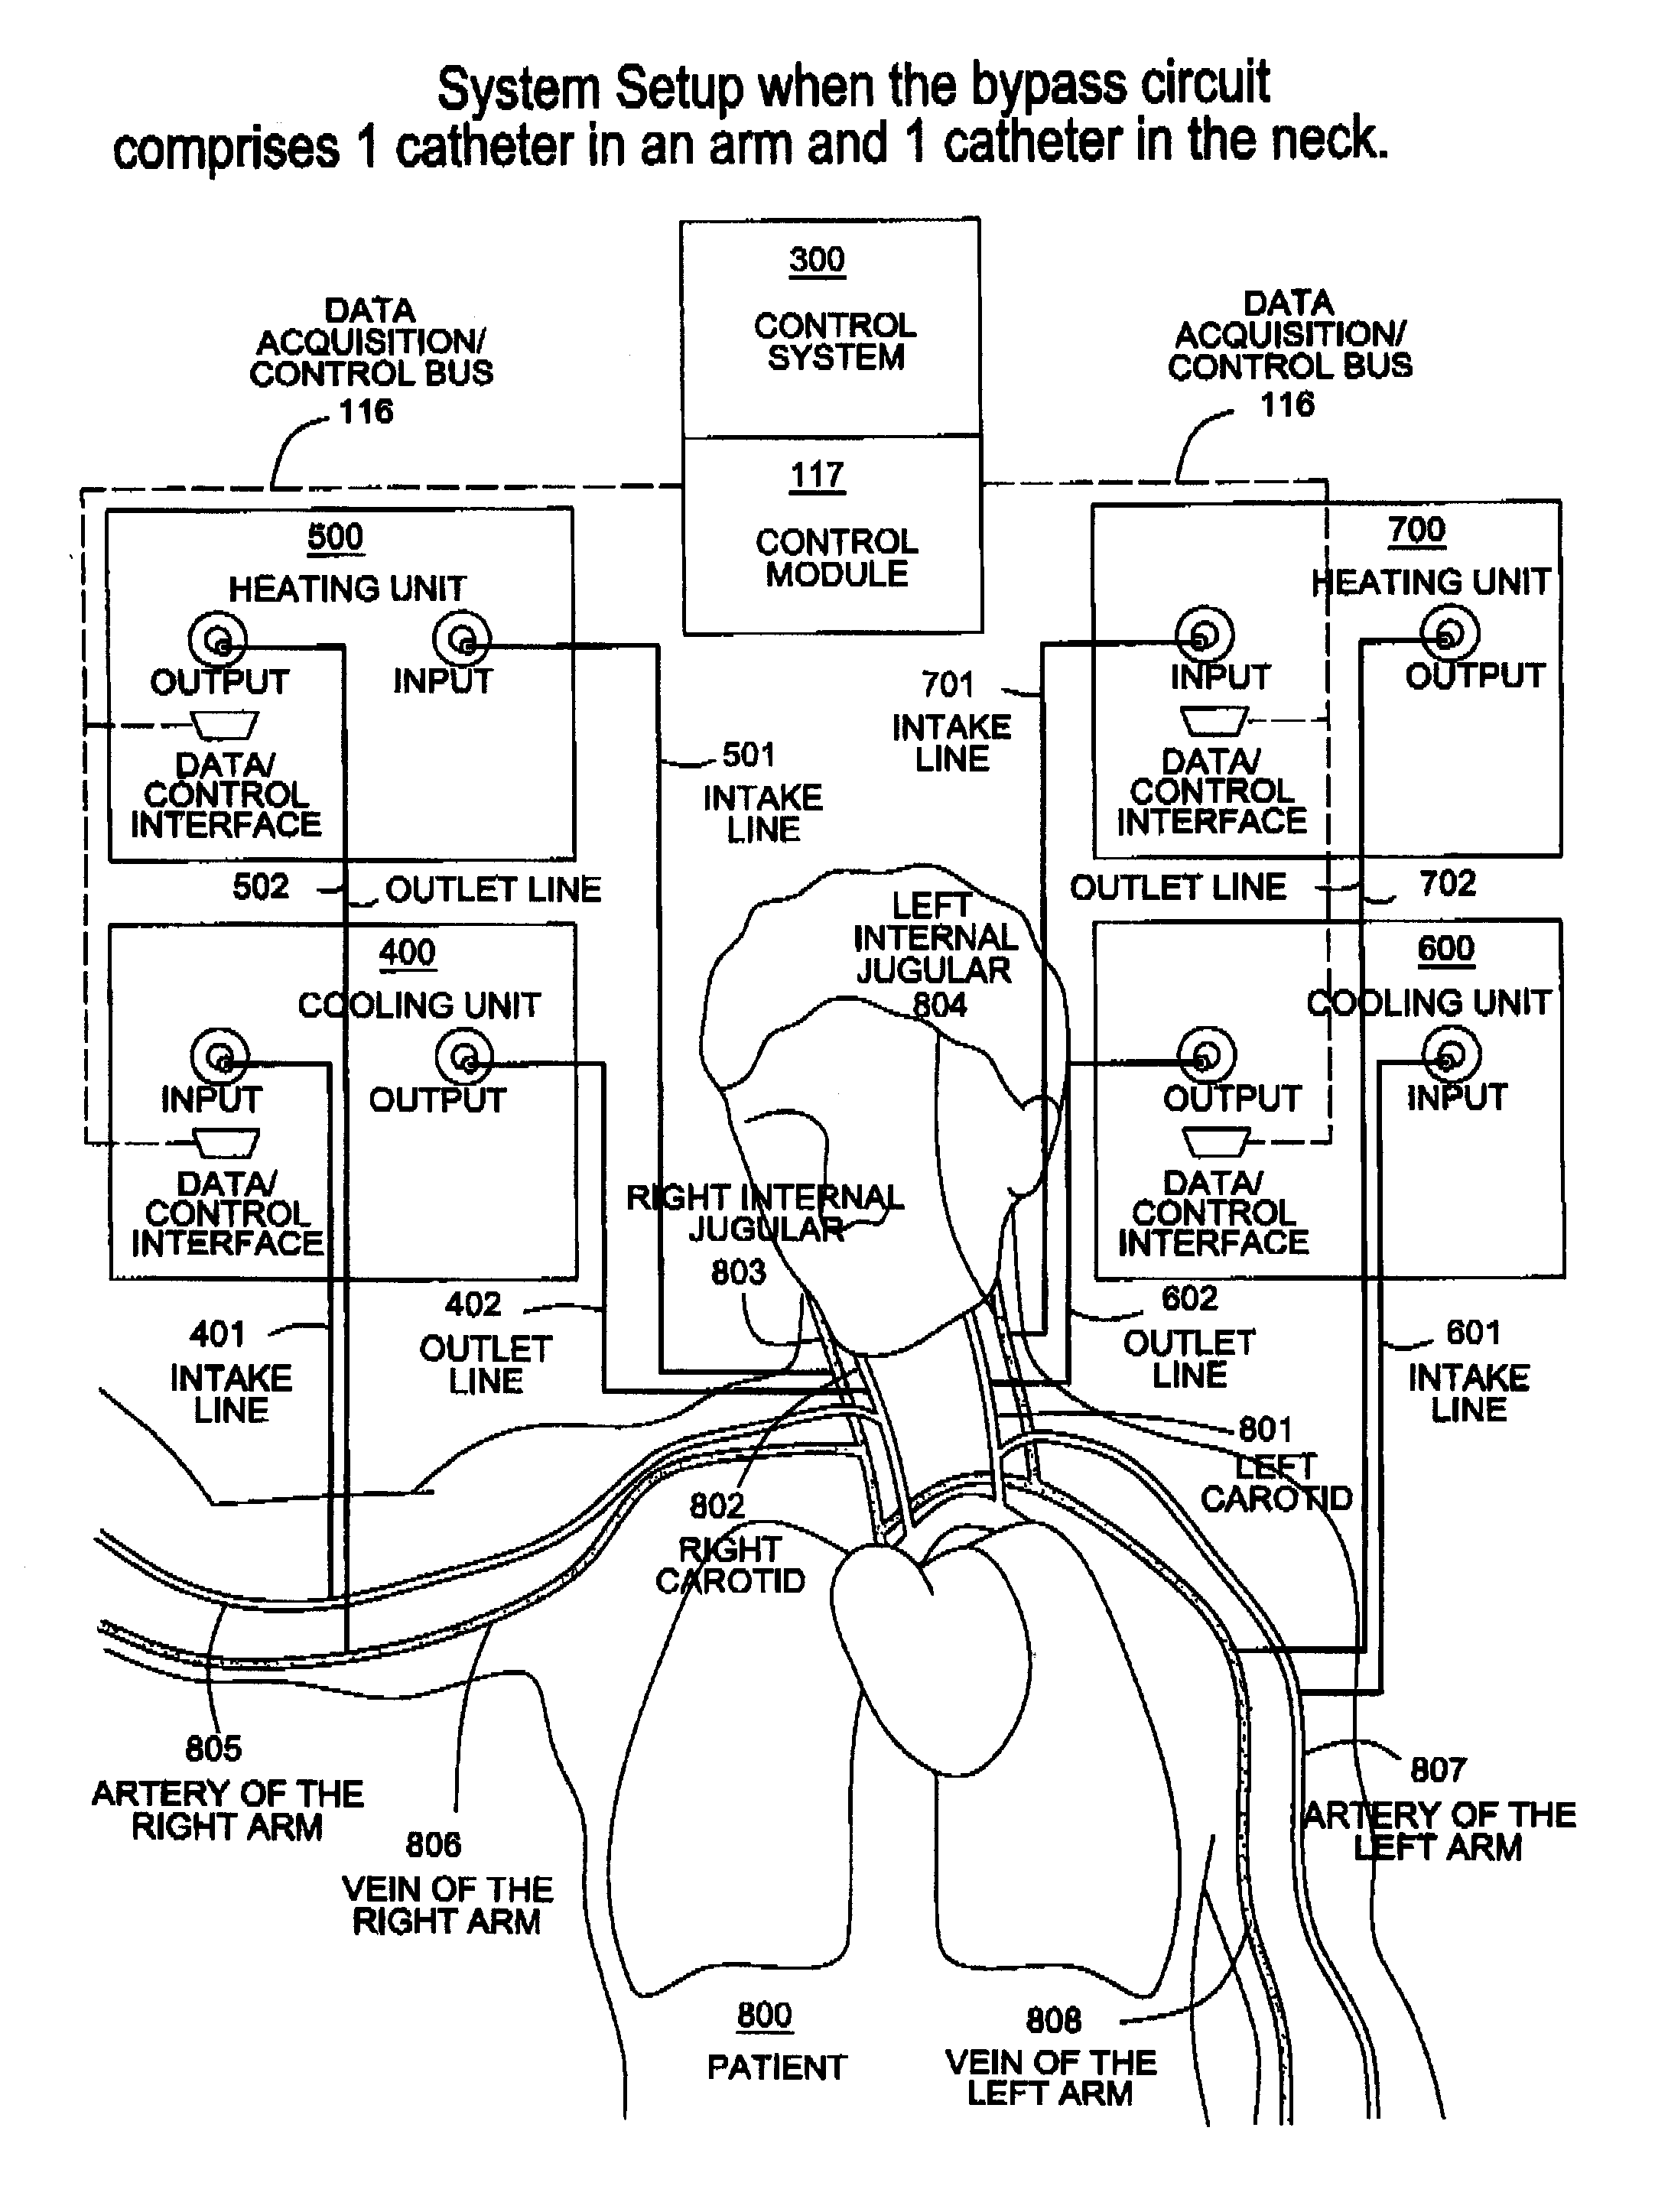 Apparatus, system and methods for extracorporeal blood processing for selectively cooling the brain relative to the body during hyperthermic treatment or to induce hypothermia of the brain